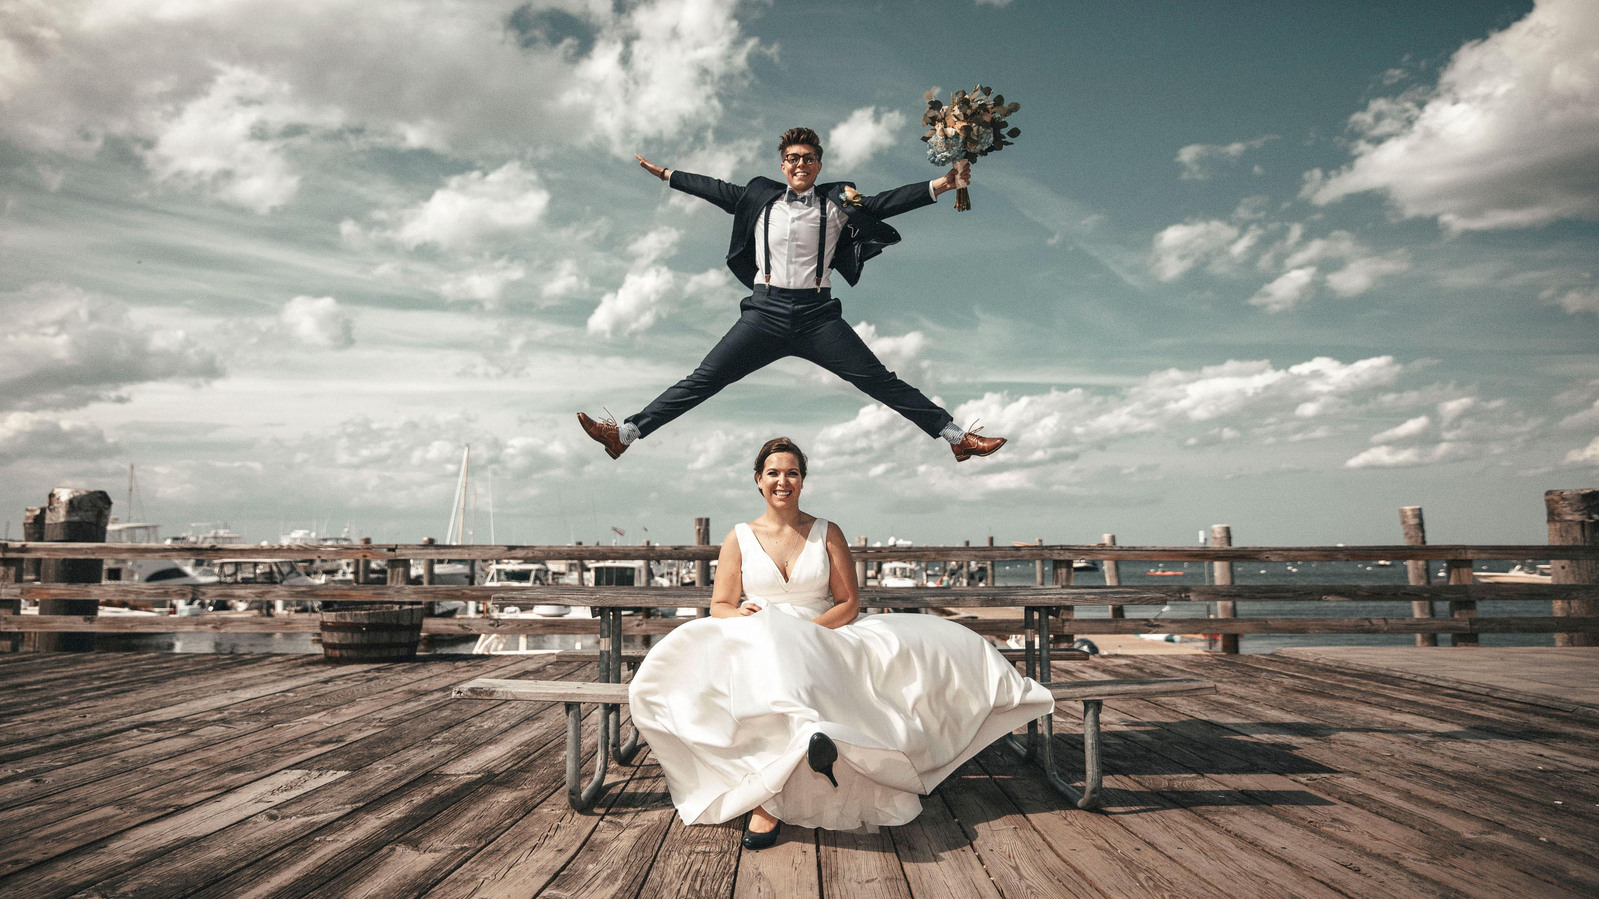 Creative and outstanding wedding photo of a groom jumping over a bride by Ivan Djikaev / Mind On Photography